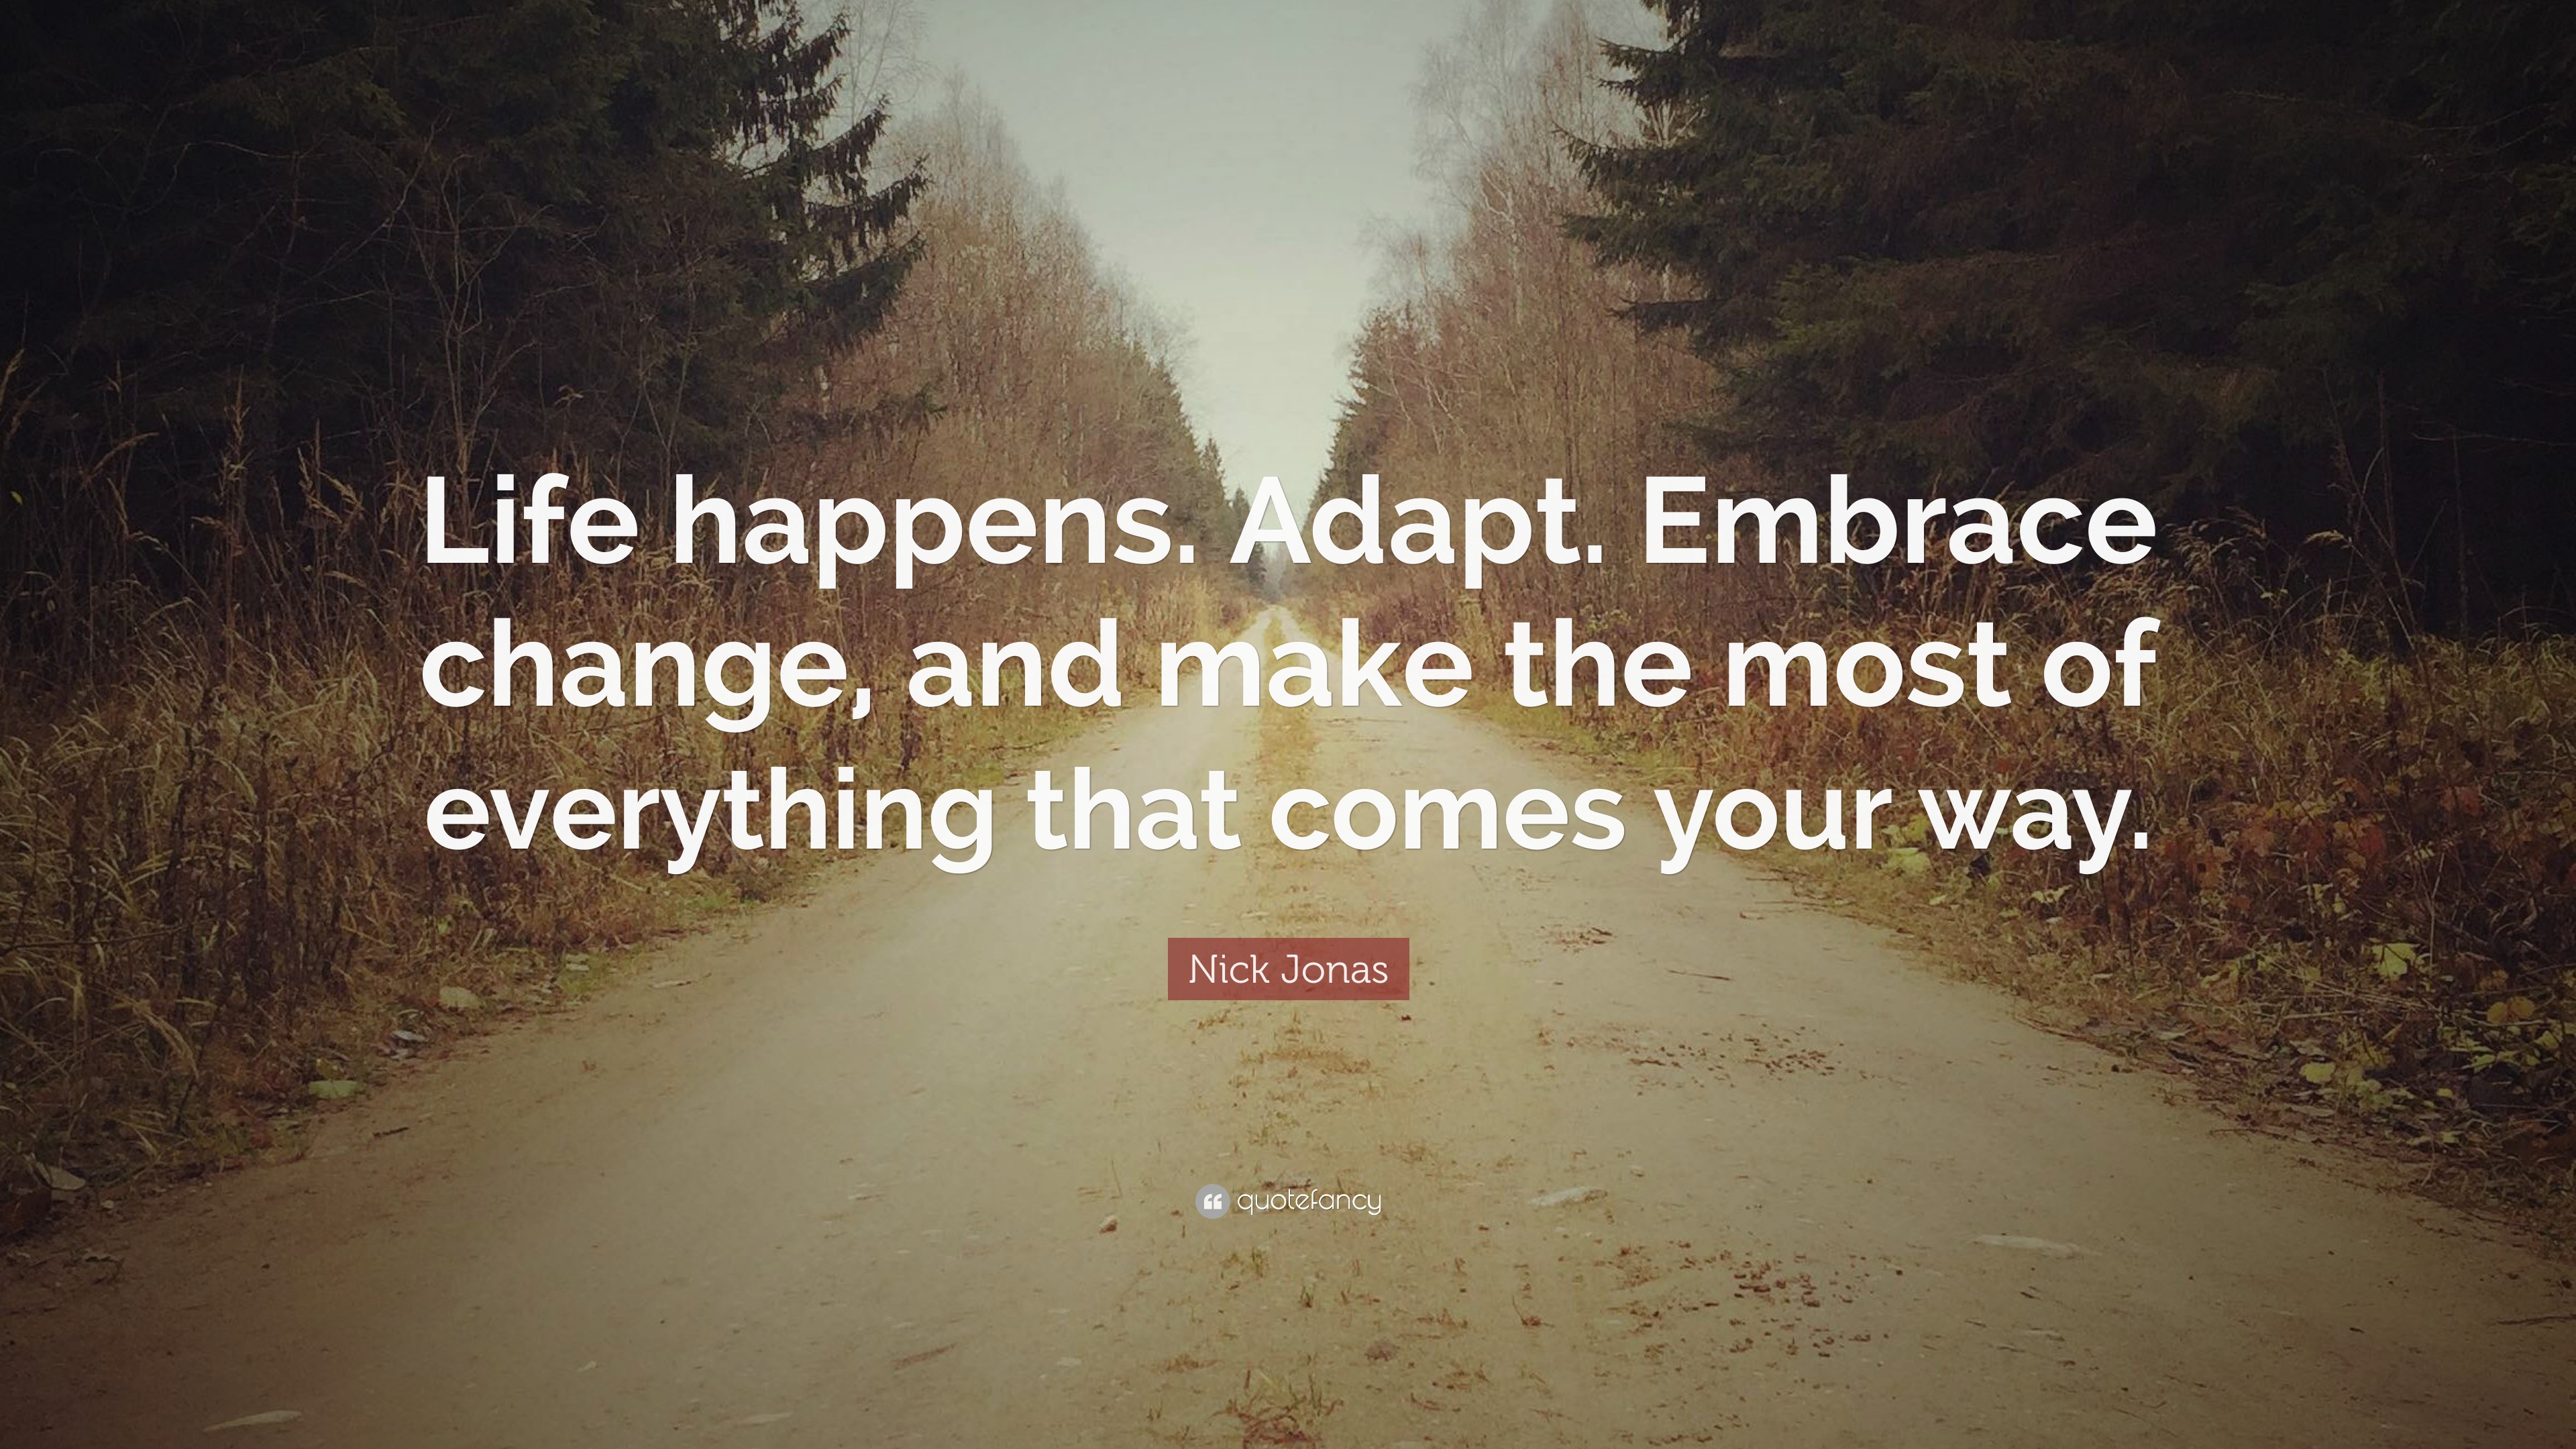 Nick Jonas Quote: “Life happens. Adapt. Embrace change, and make the